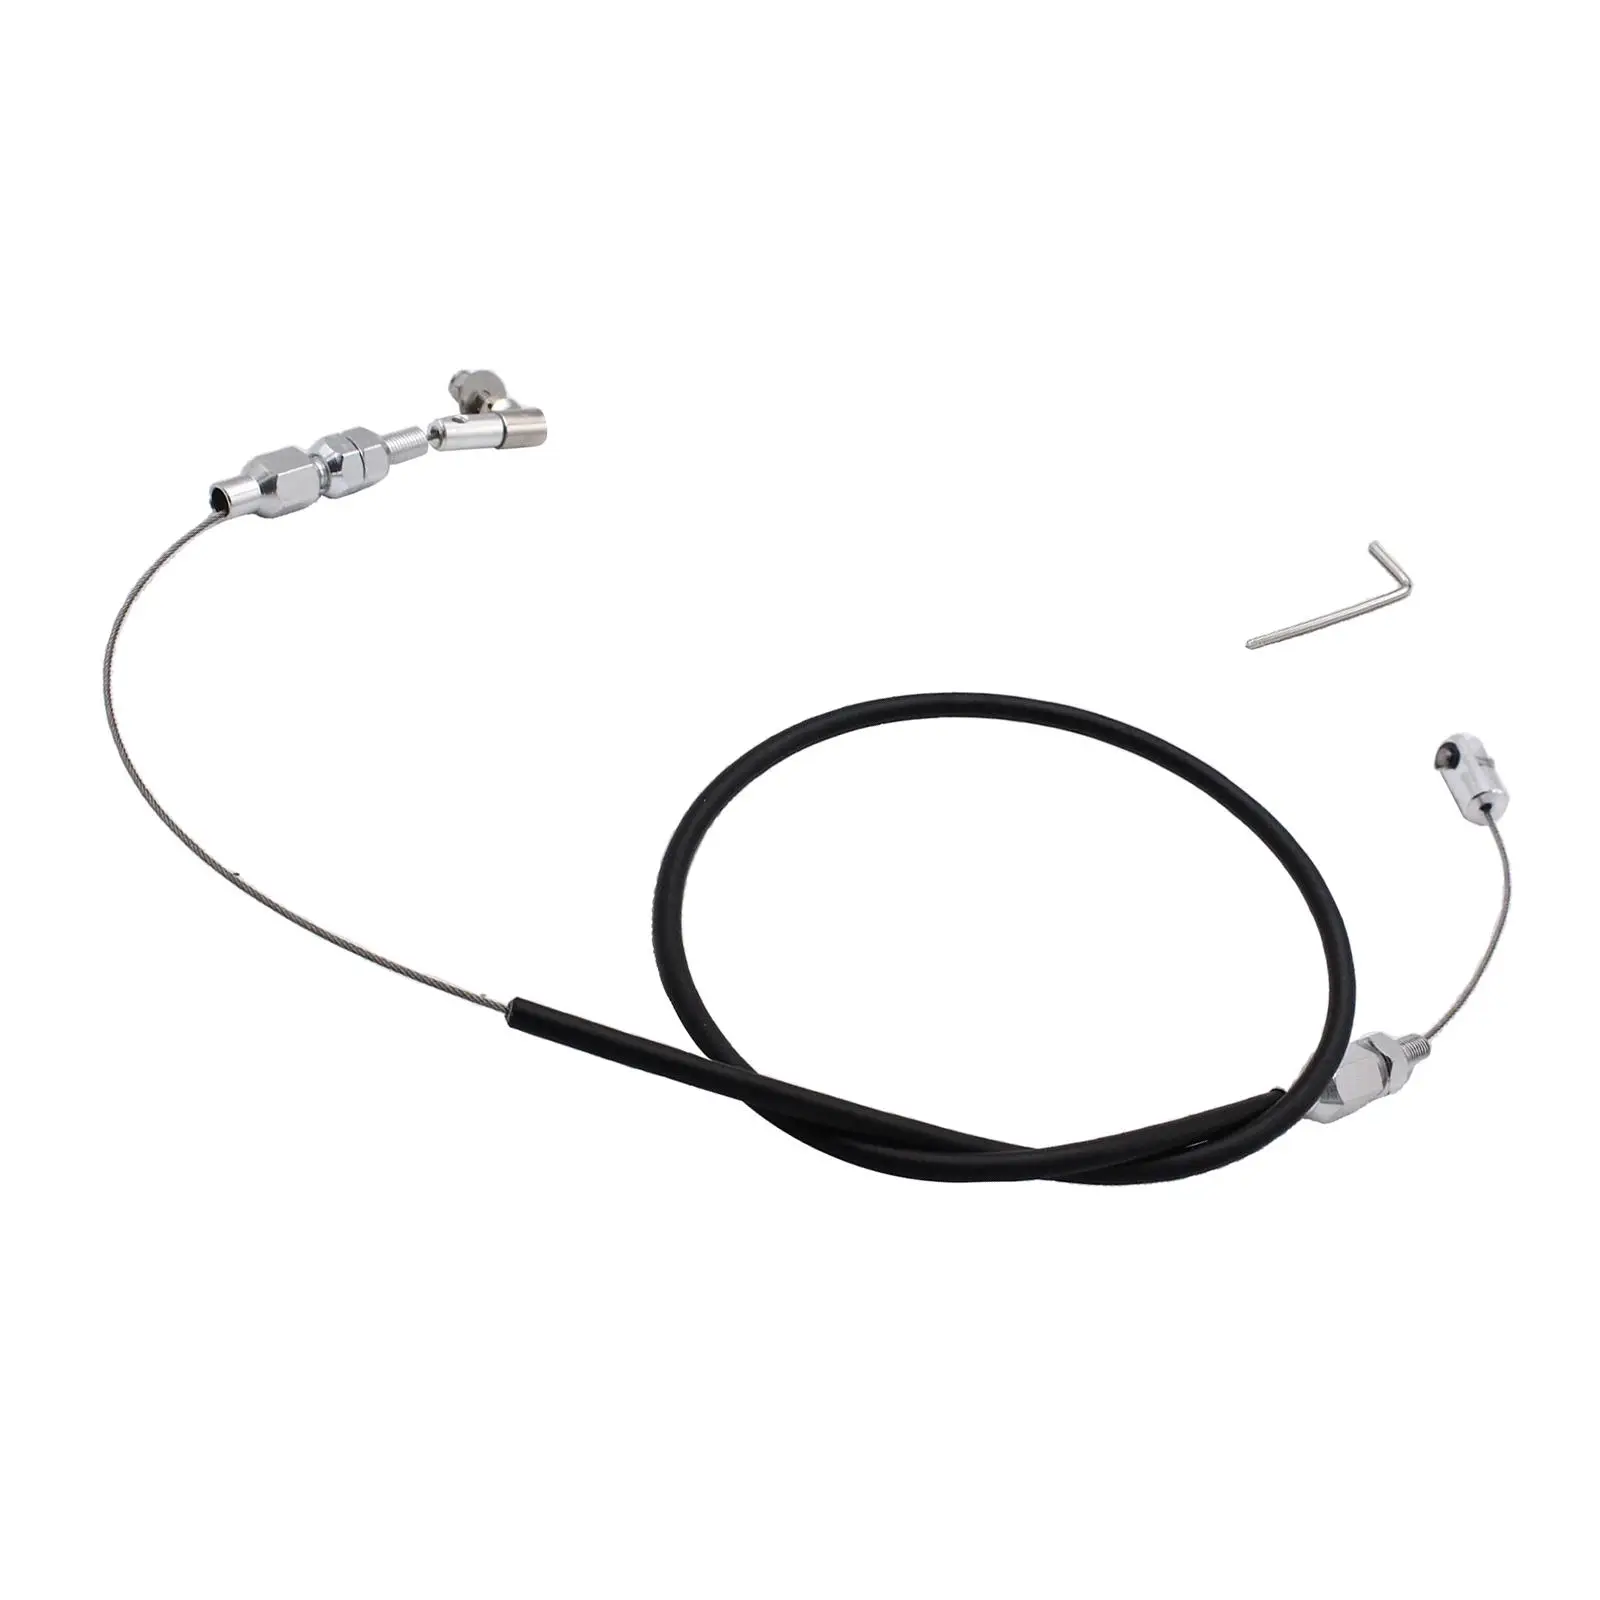 24in Throttle Cable Hz-6054-Pbk Easy to Install Professional Accessories